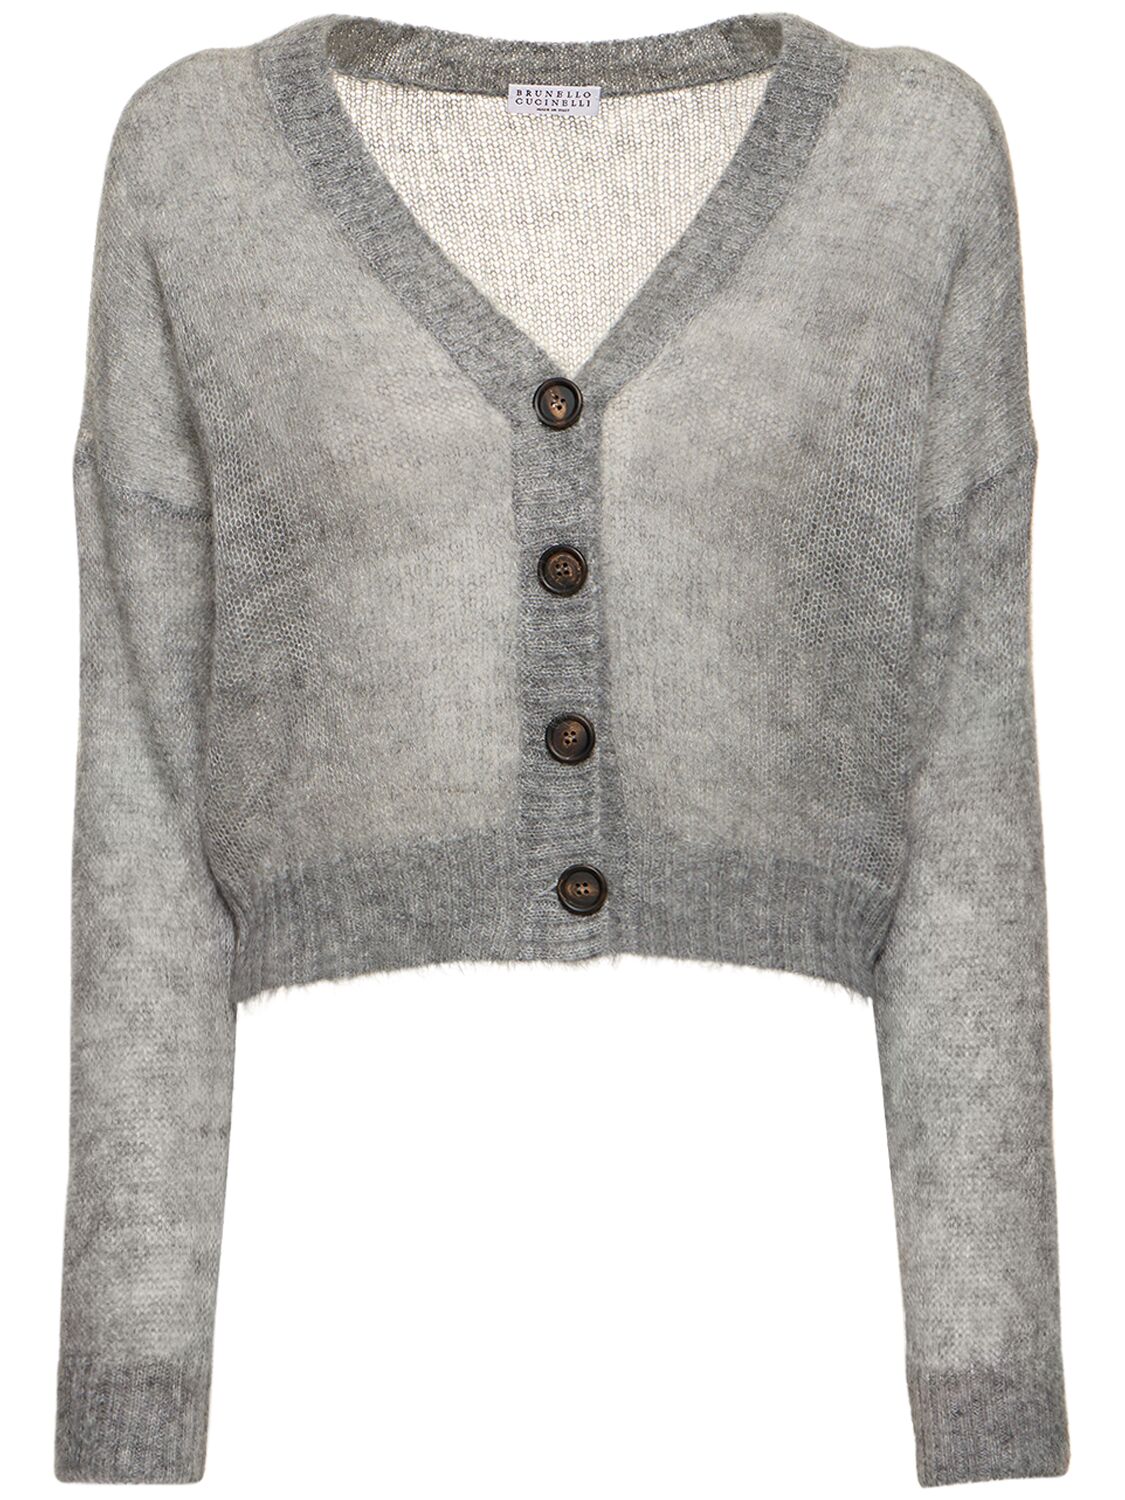 Image of Mohair Blend Knit Cardigan